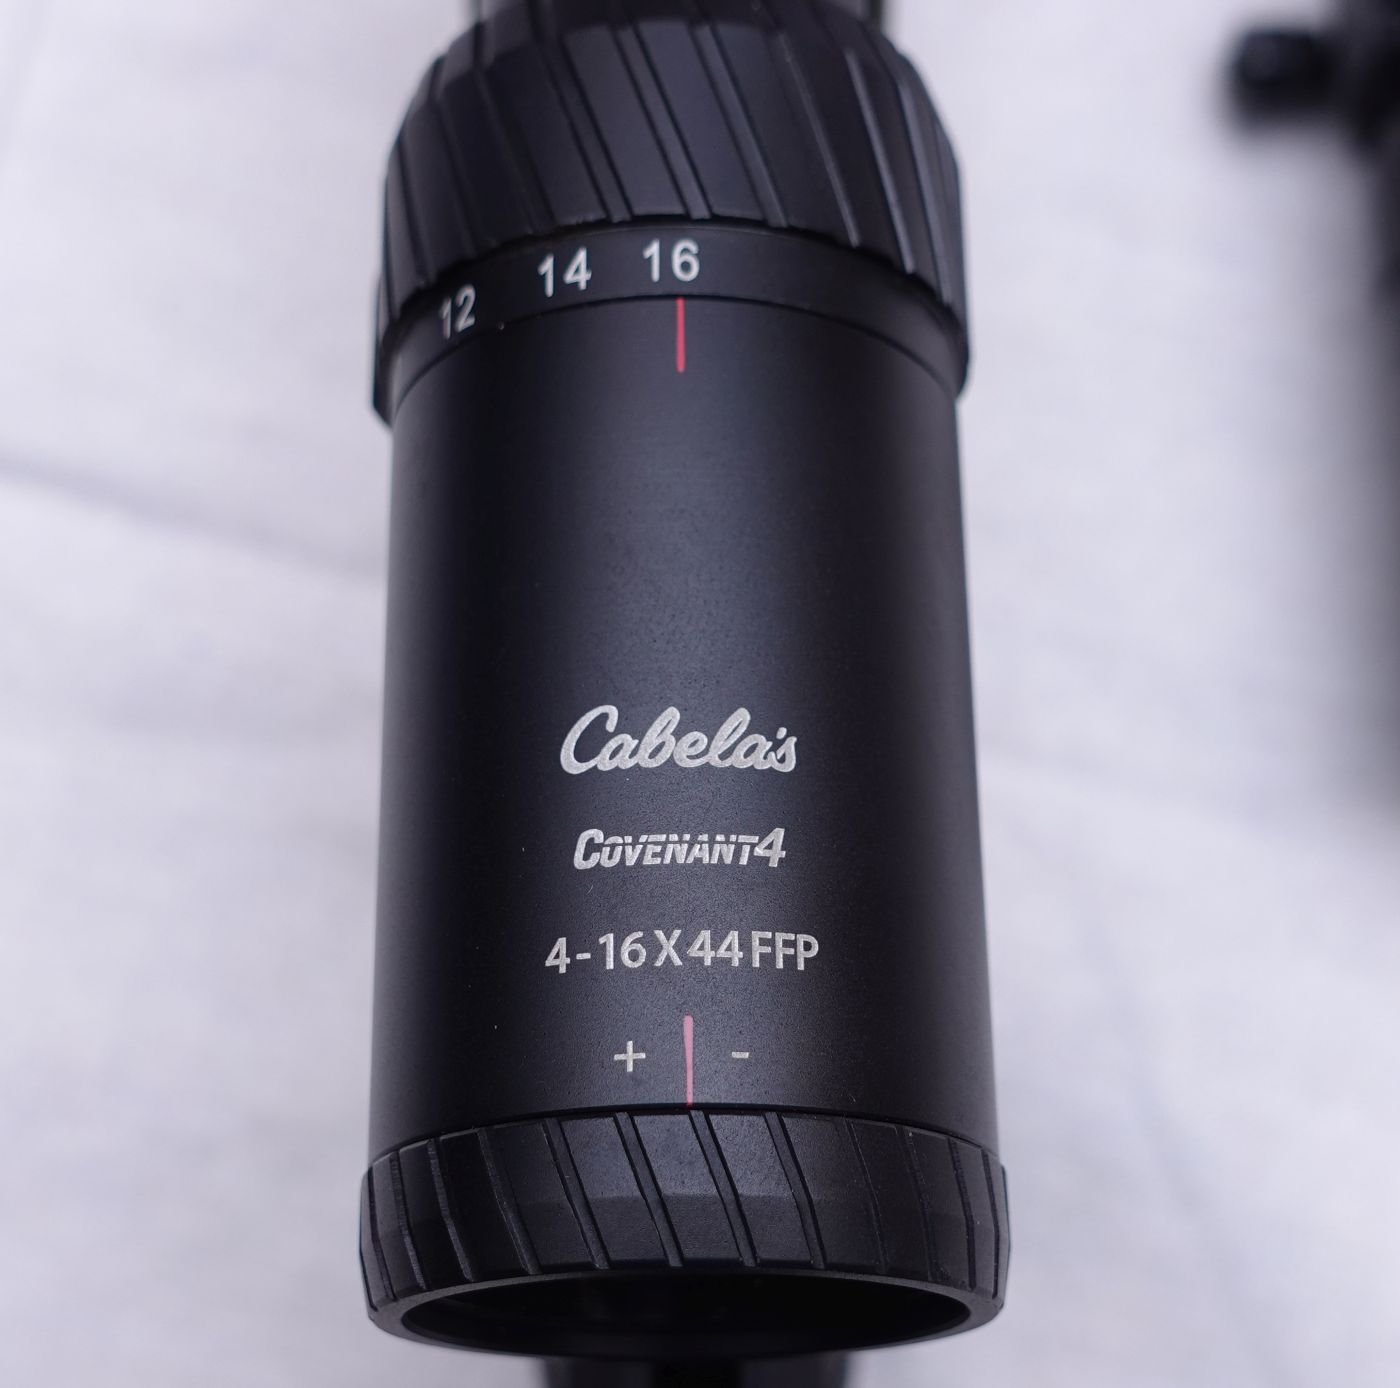 Cabela’s Covenant 4 Scope Review